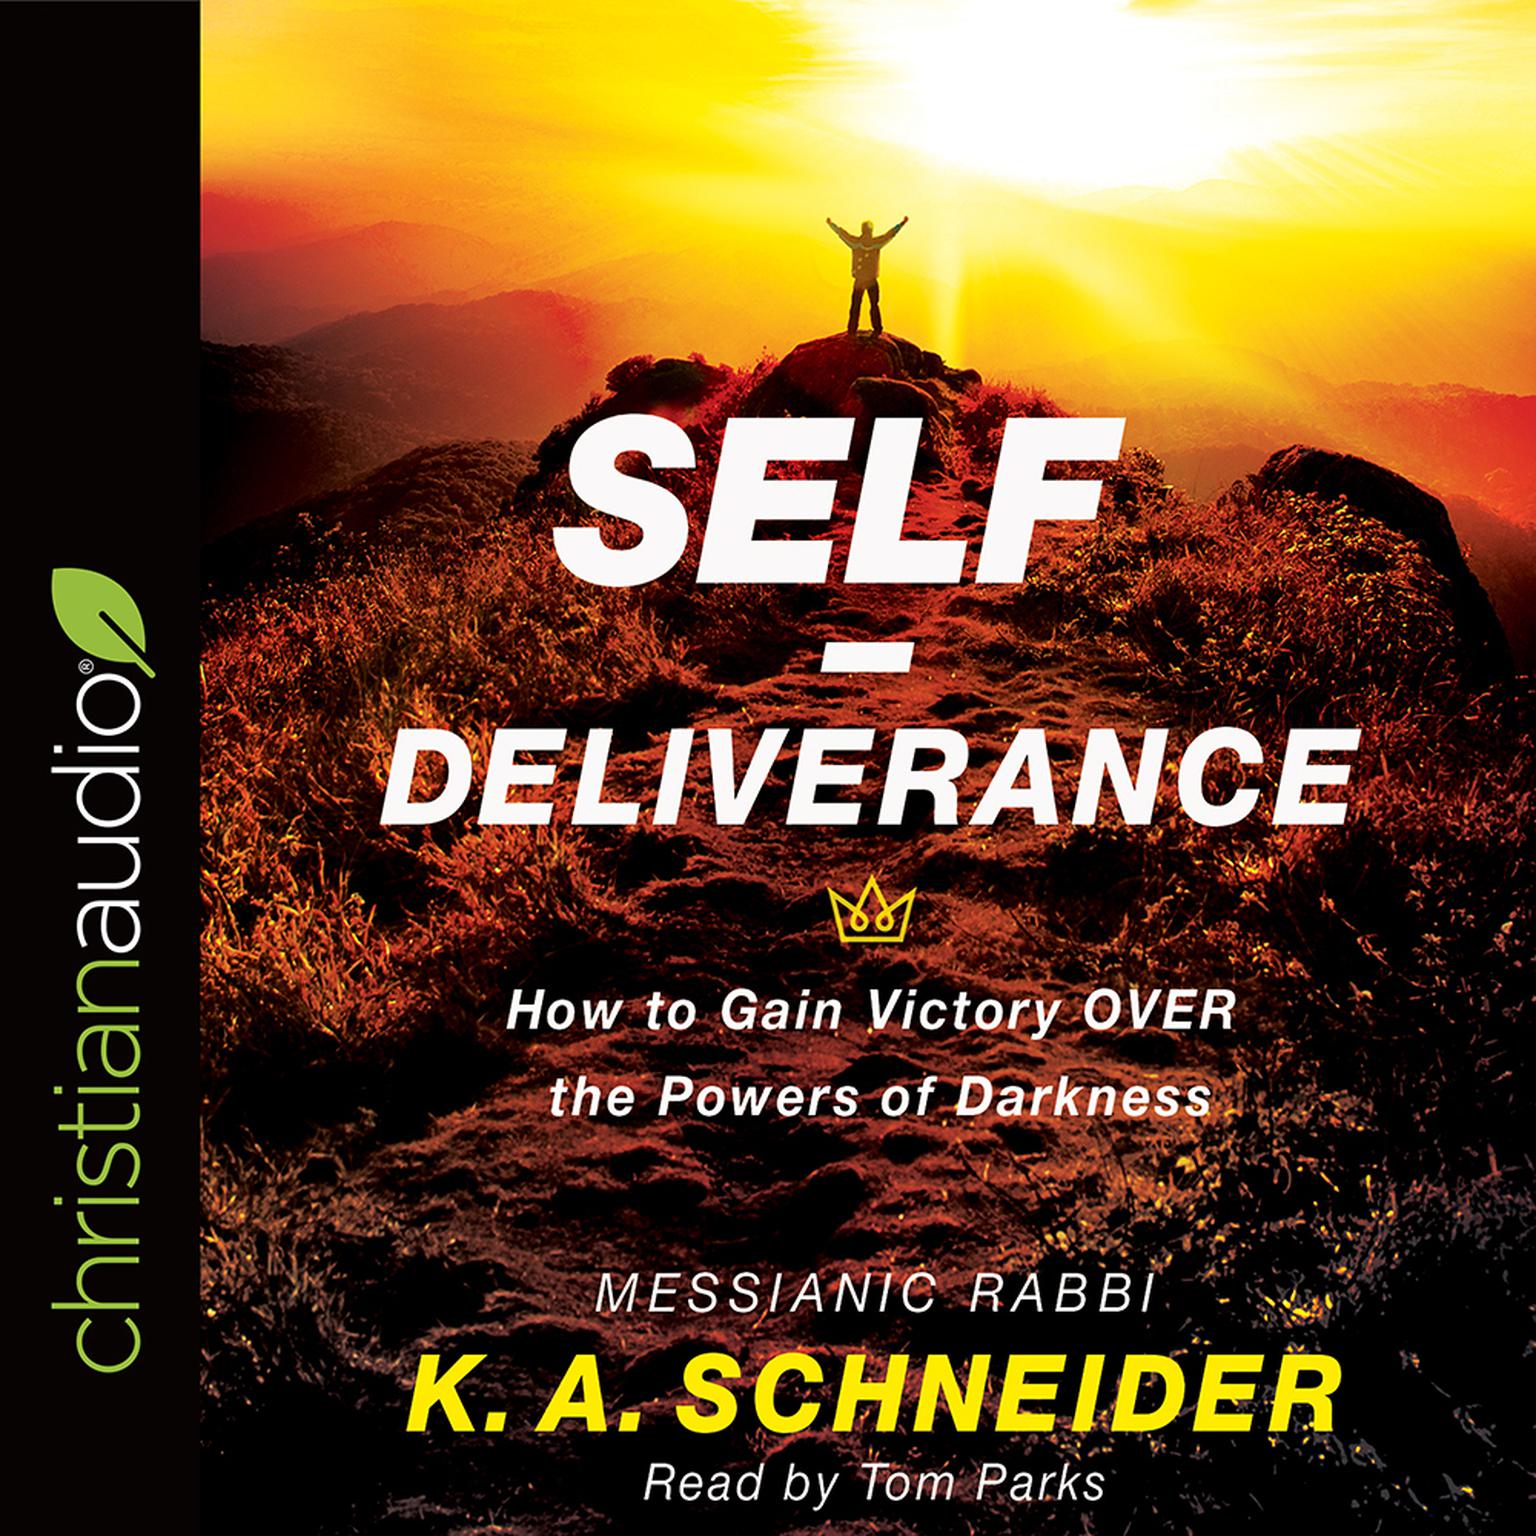 Self-Deliverance: How to Gain Victory OVER the Powers of Darkness Audiobook, by Rabbi K. A. Schneider